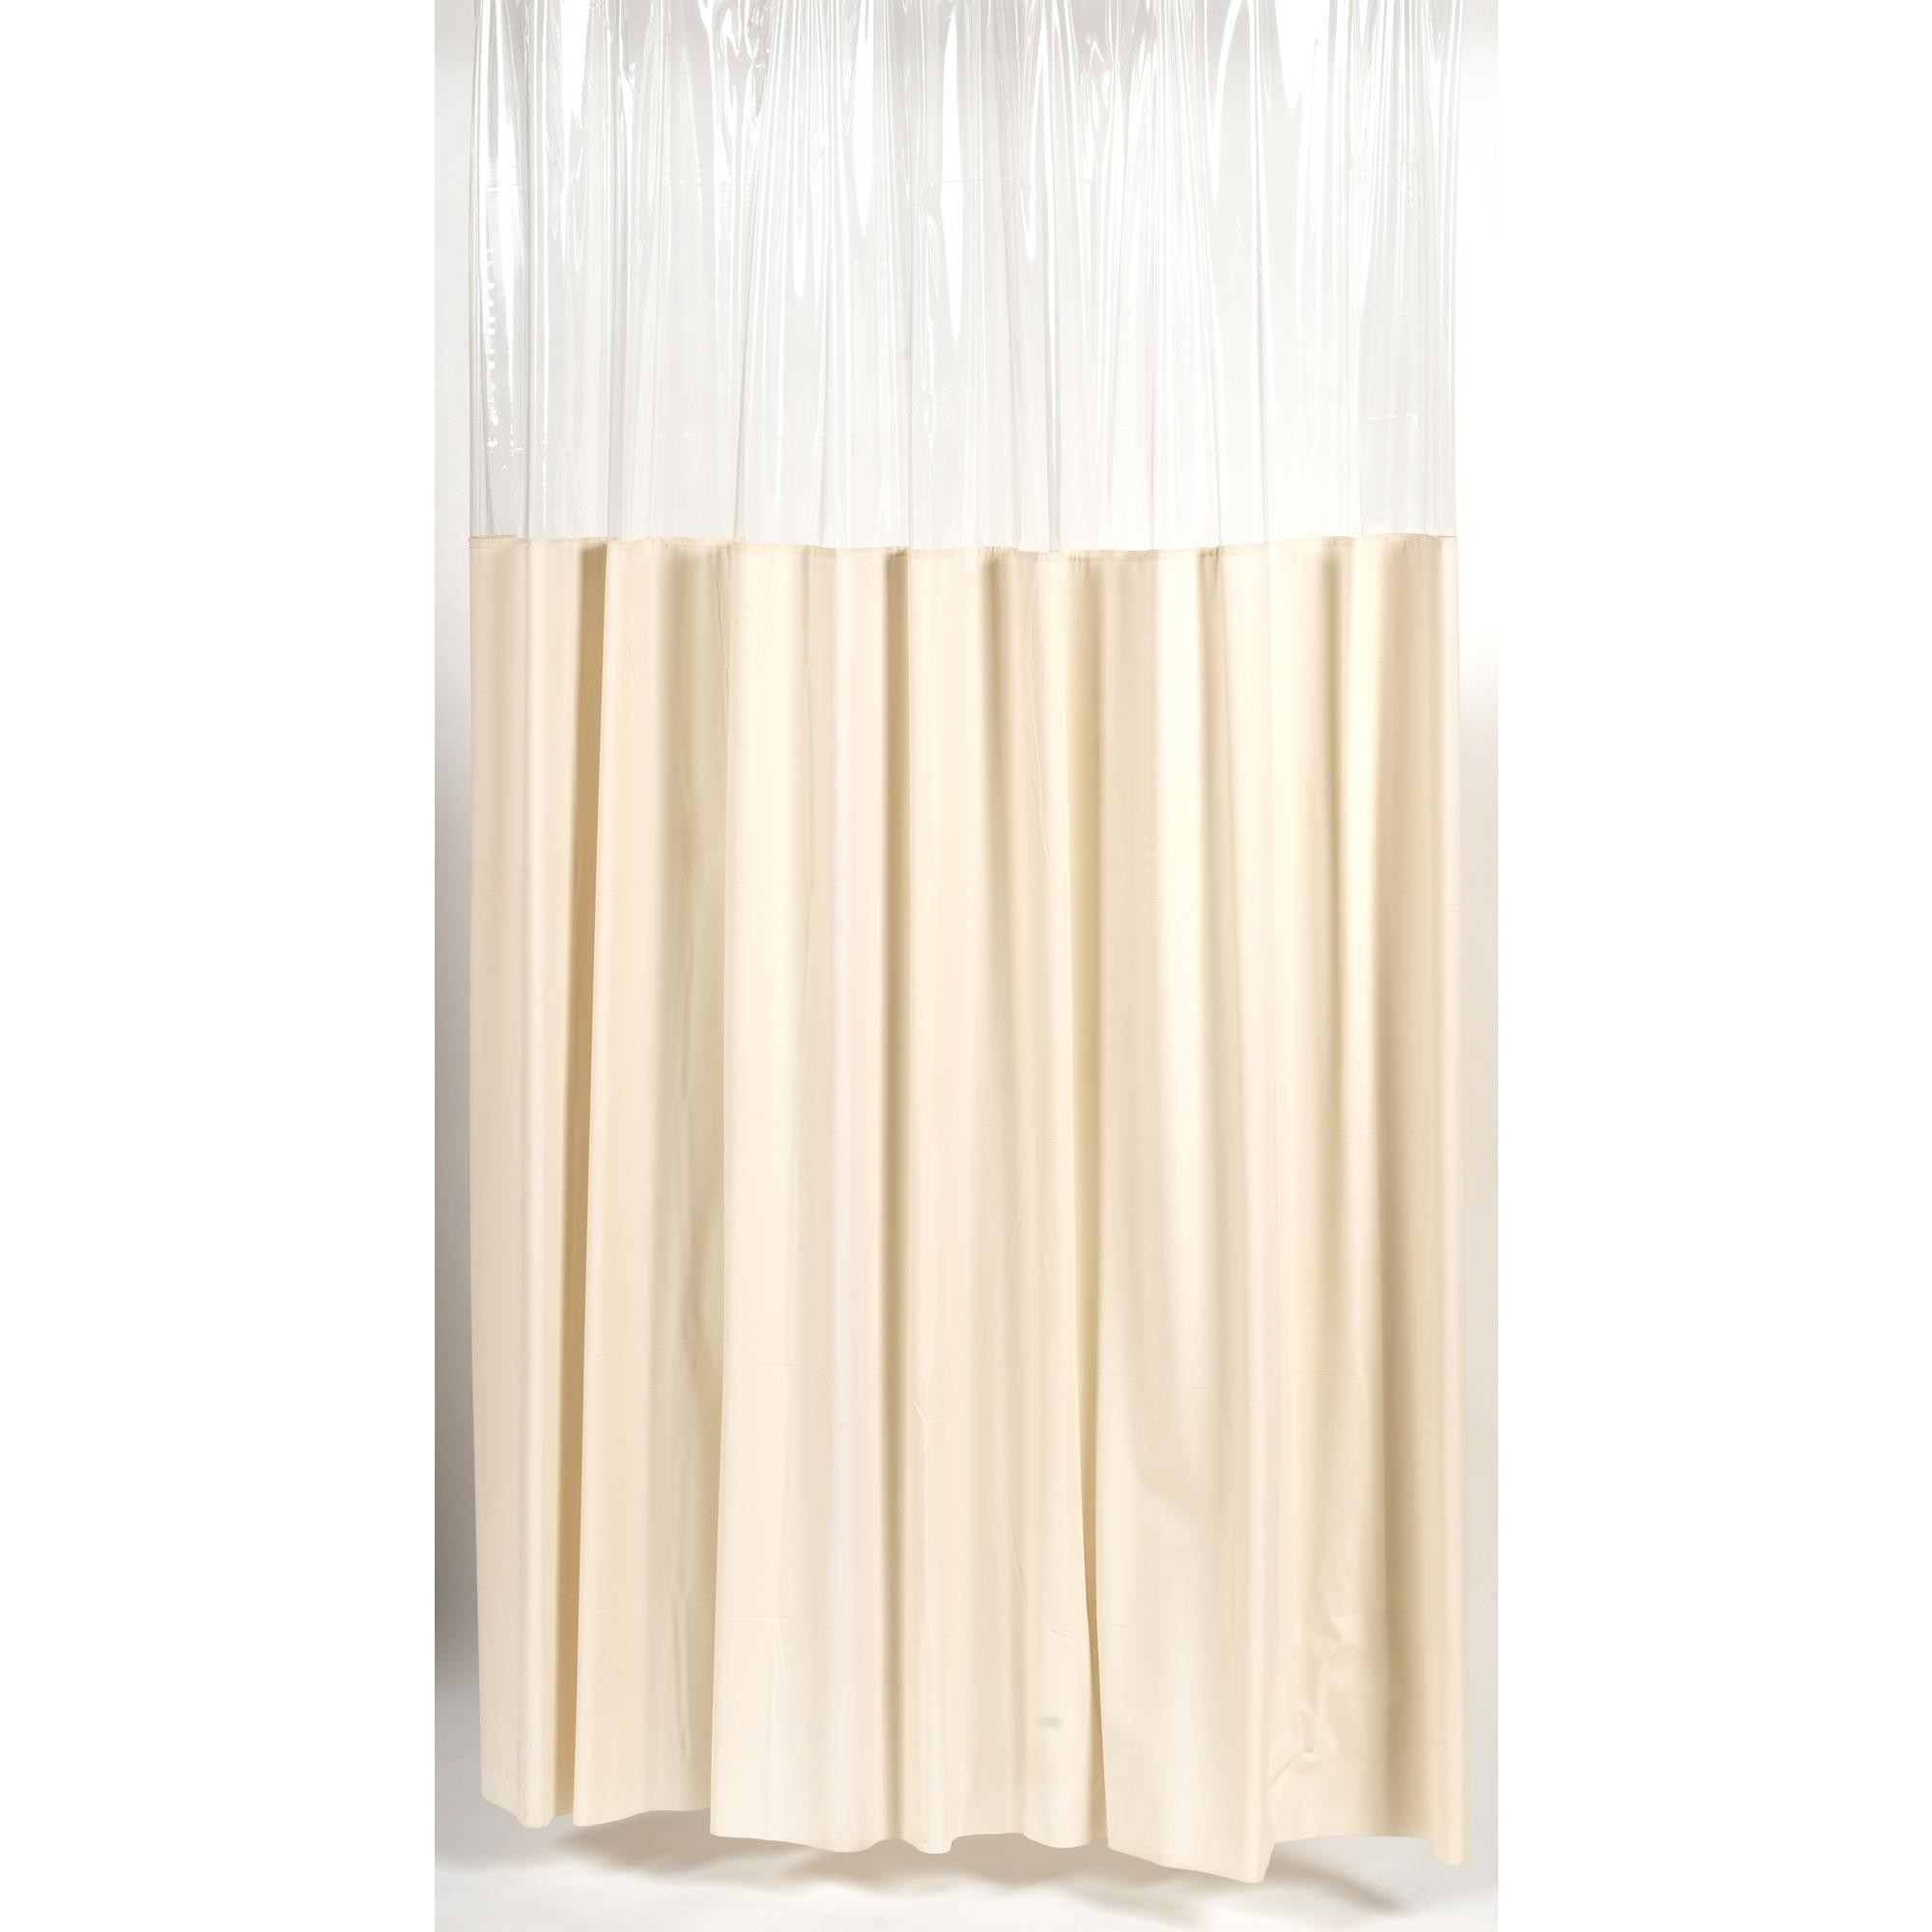 Carnation home shower stall sized window shower curtain